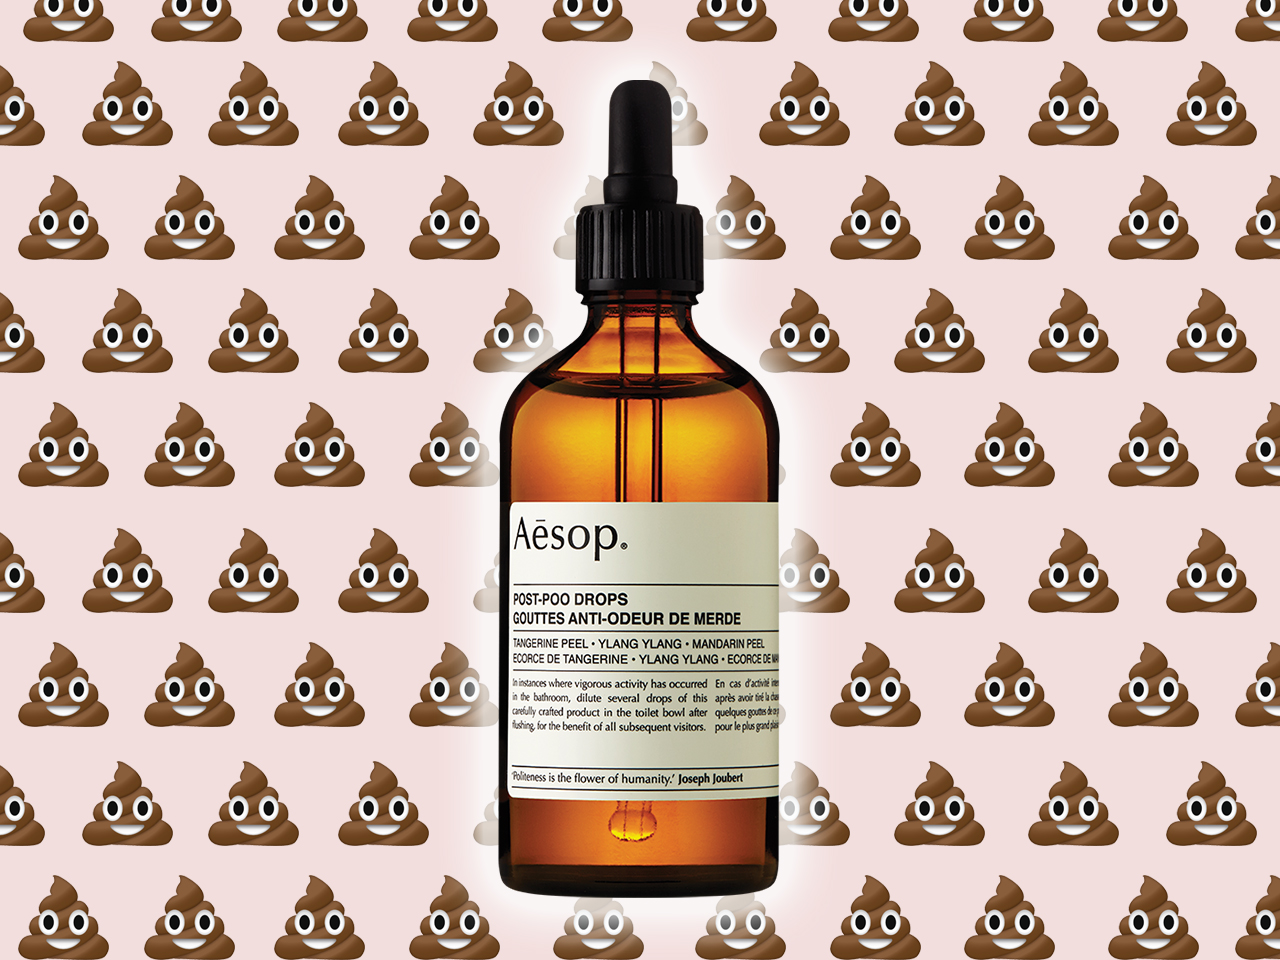 Aesop's post-poo drops are an ideal bathroom deodorizer (apart from the $39 price tag).